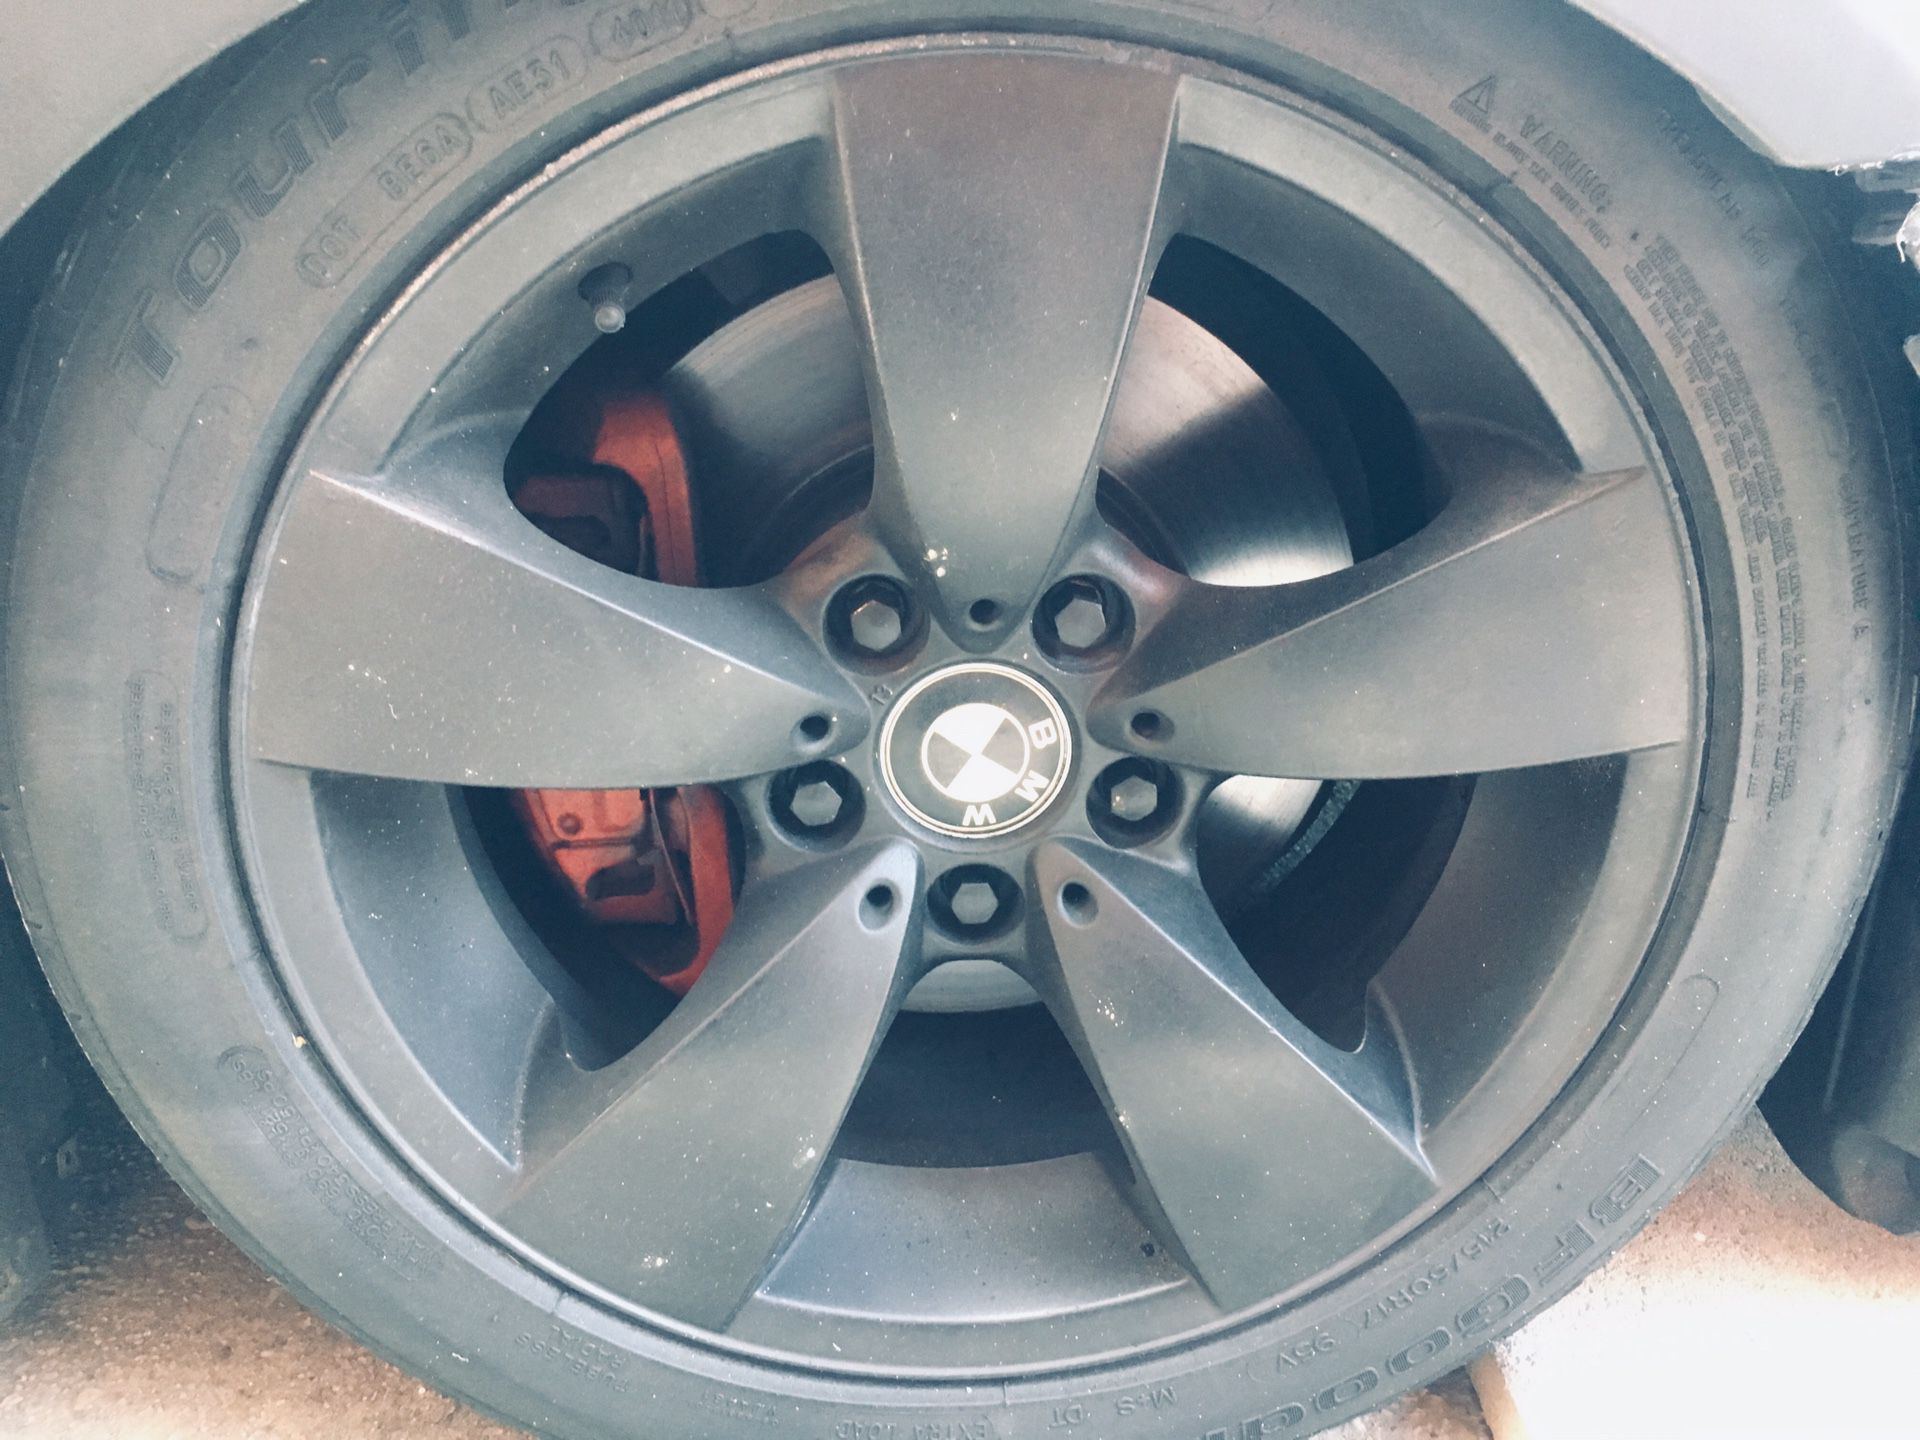 04 bmw 5 series wheels (cash and local pick up only)